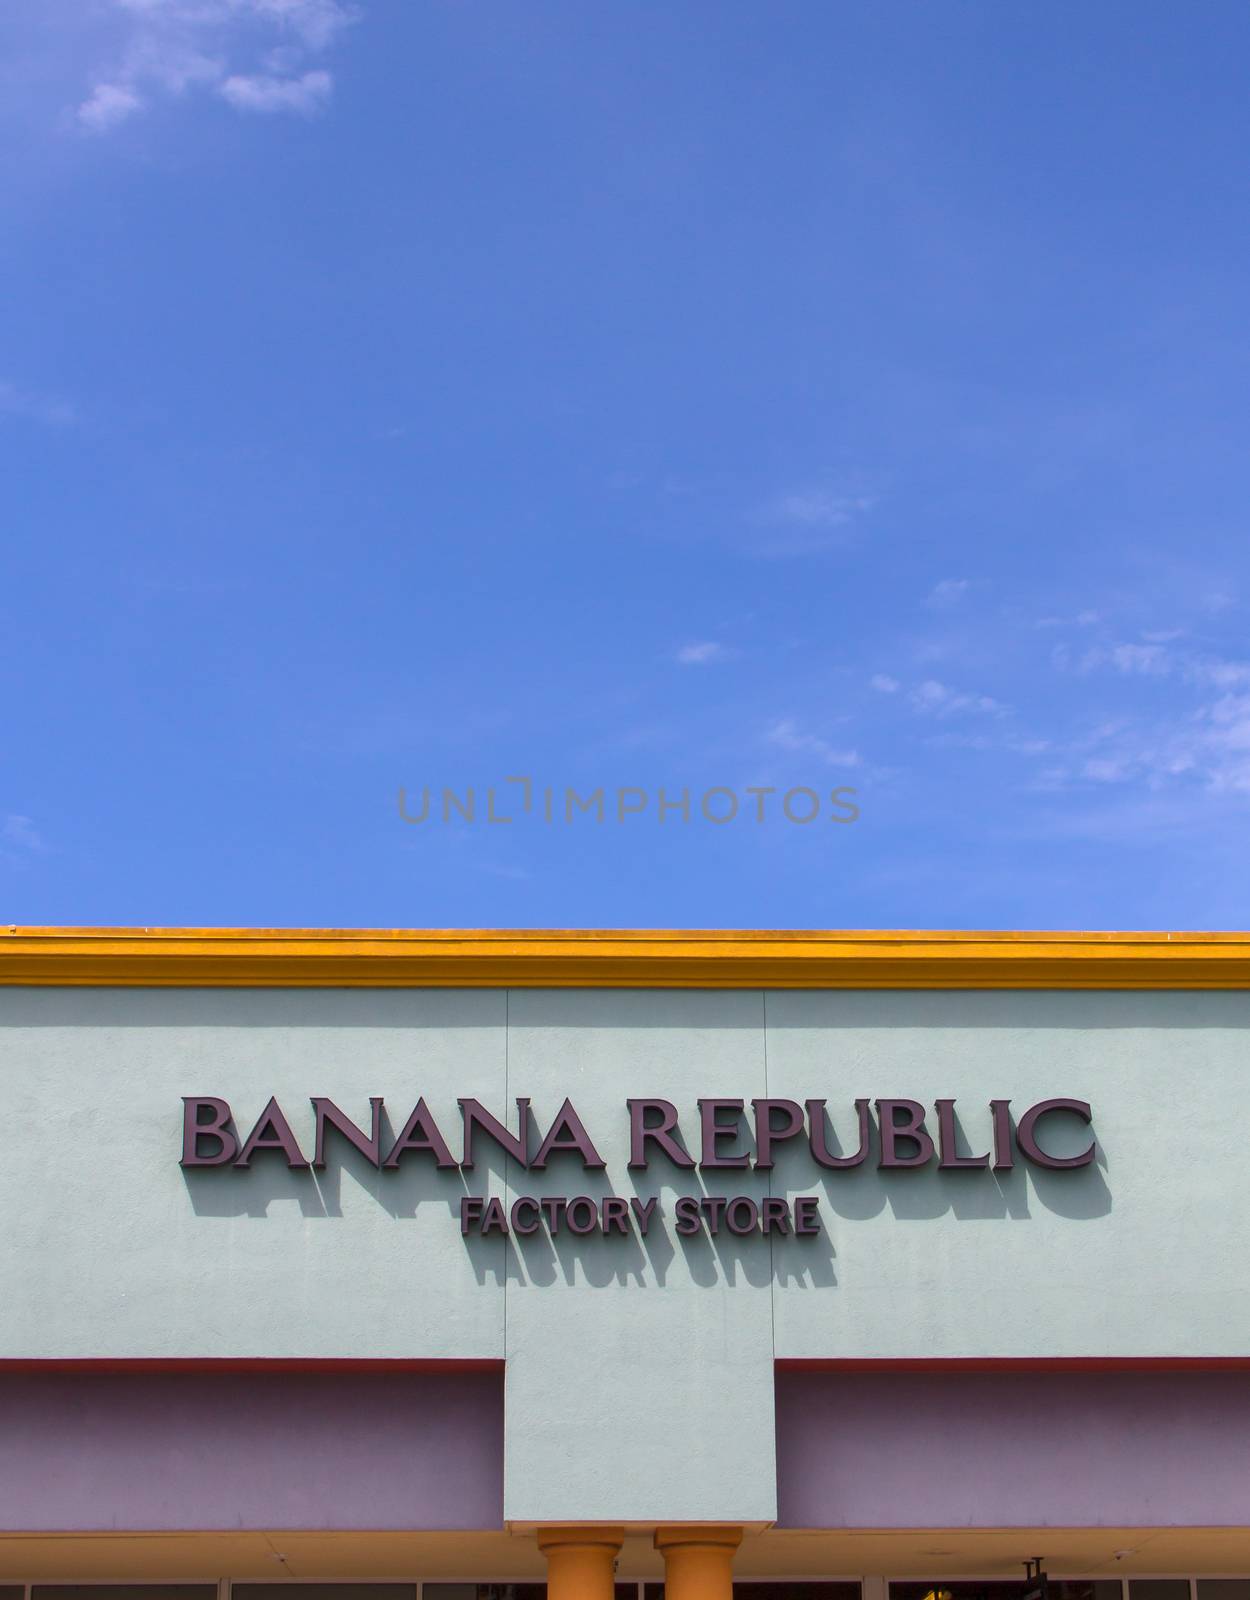 Banana Repulic Store Exterior by wolterk